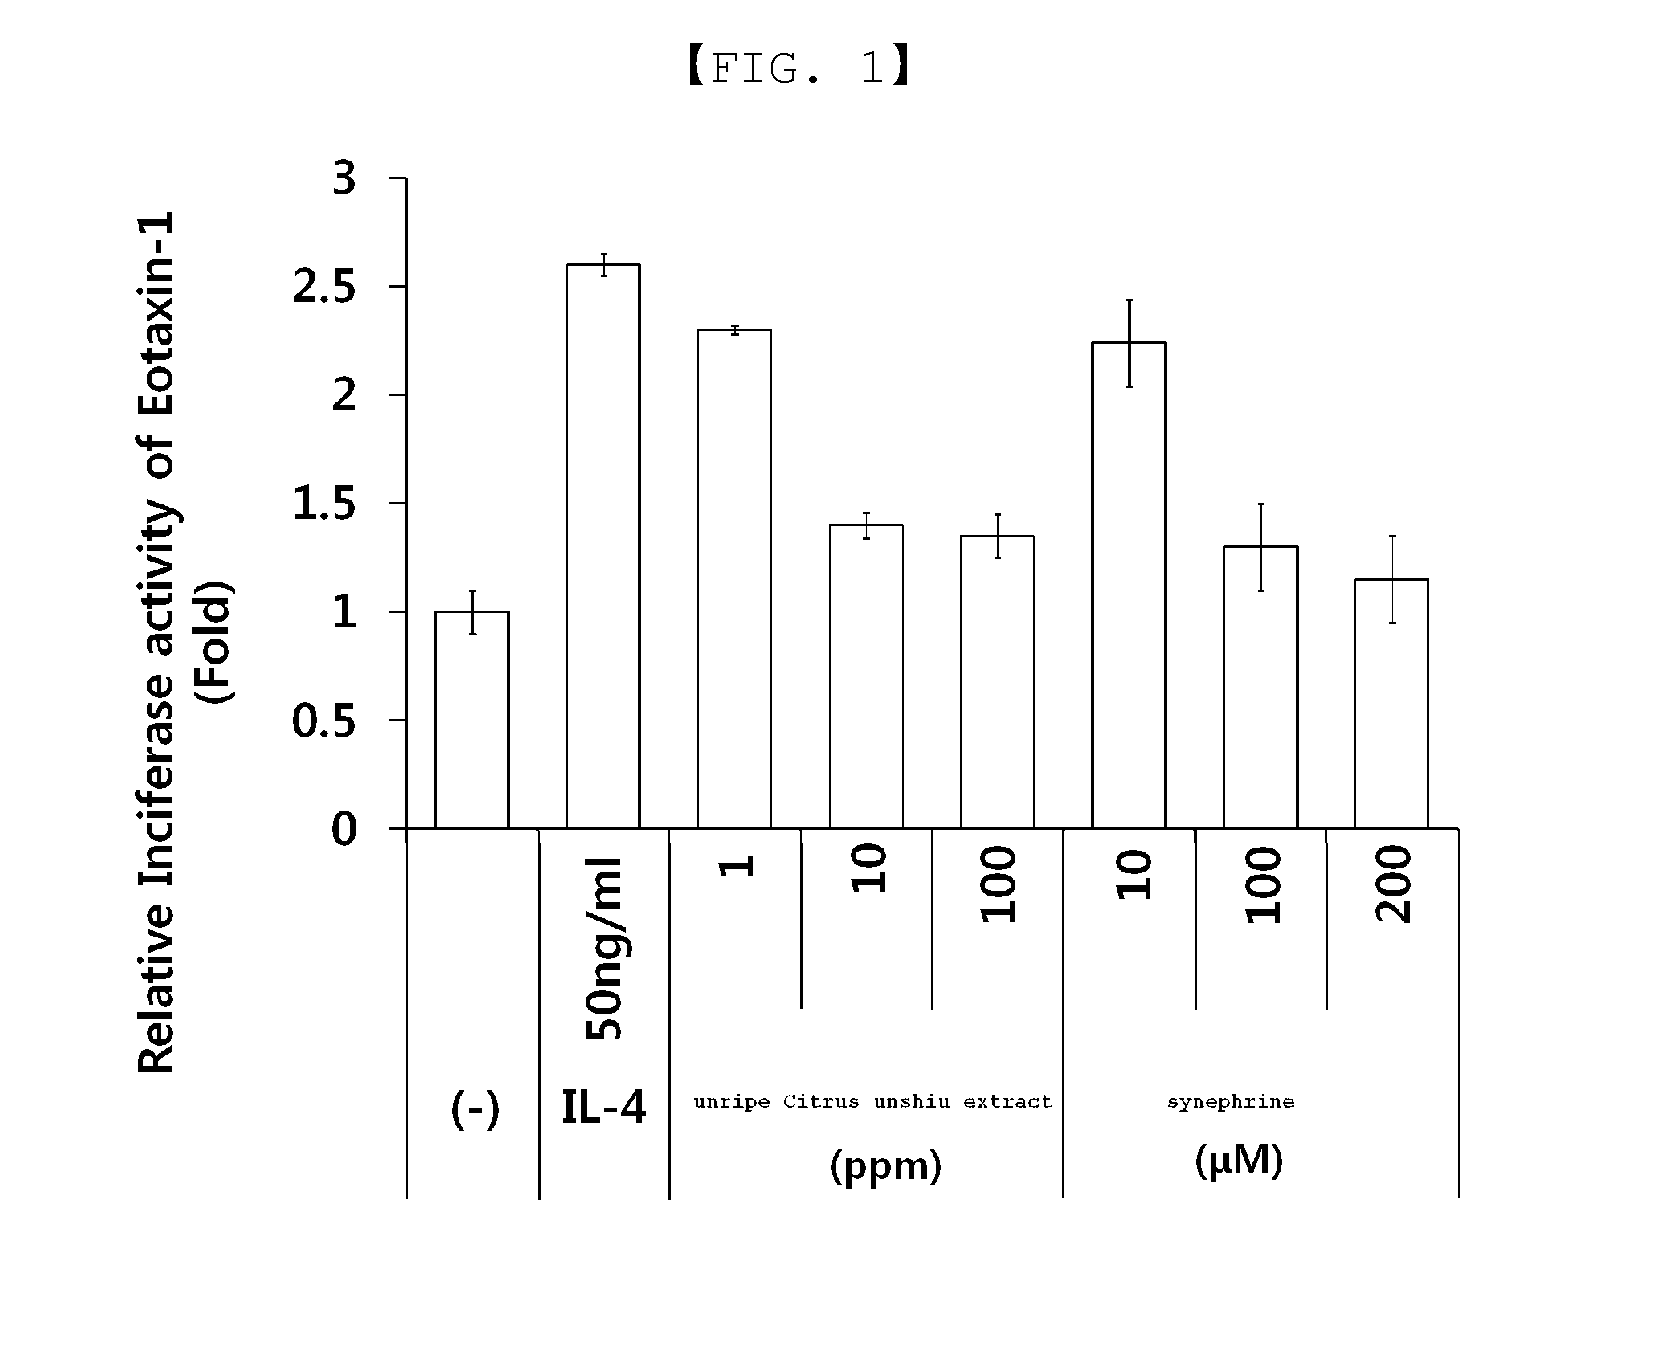 Composition for treating or preventing inflammatory skin disease, comprising, as active ingredient, immature citrus fruit extract, or synephrine or salt thereof